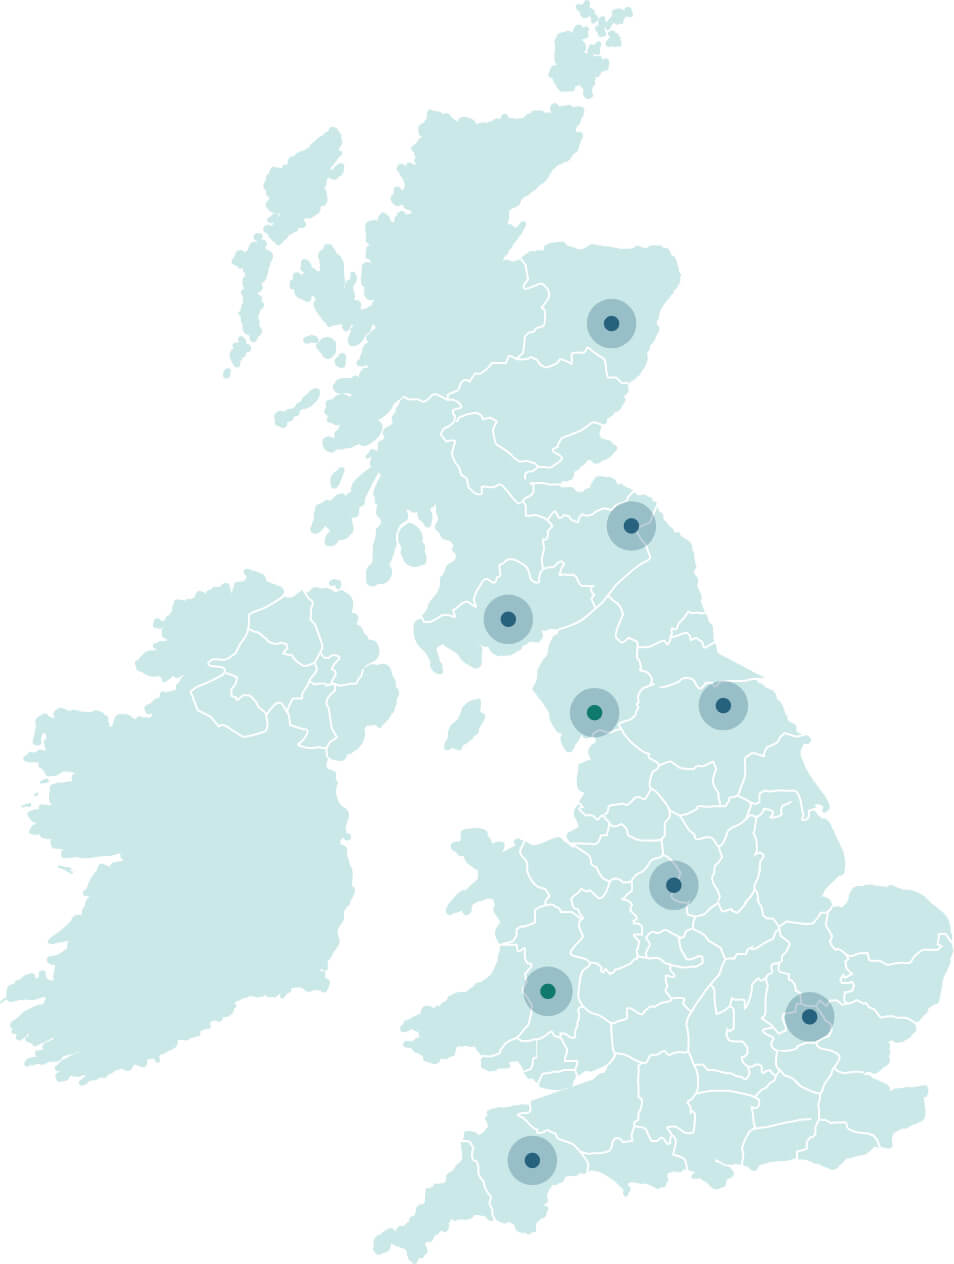 map of the uk showing clinical partners clinics